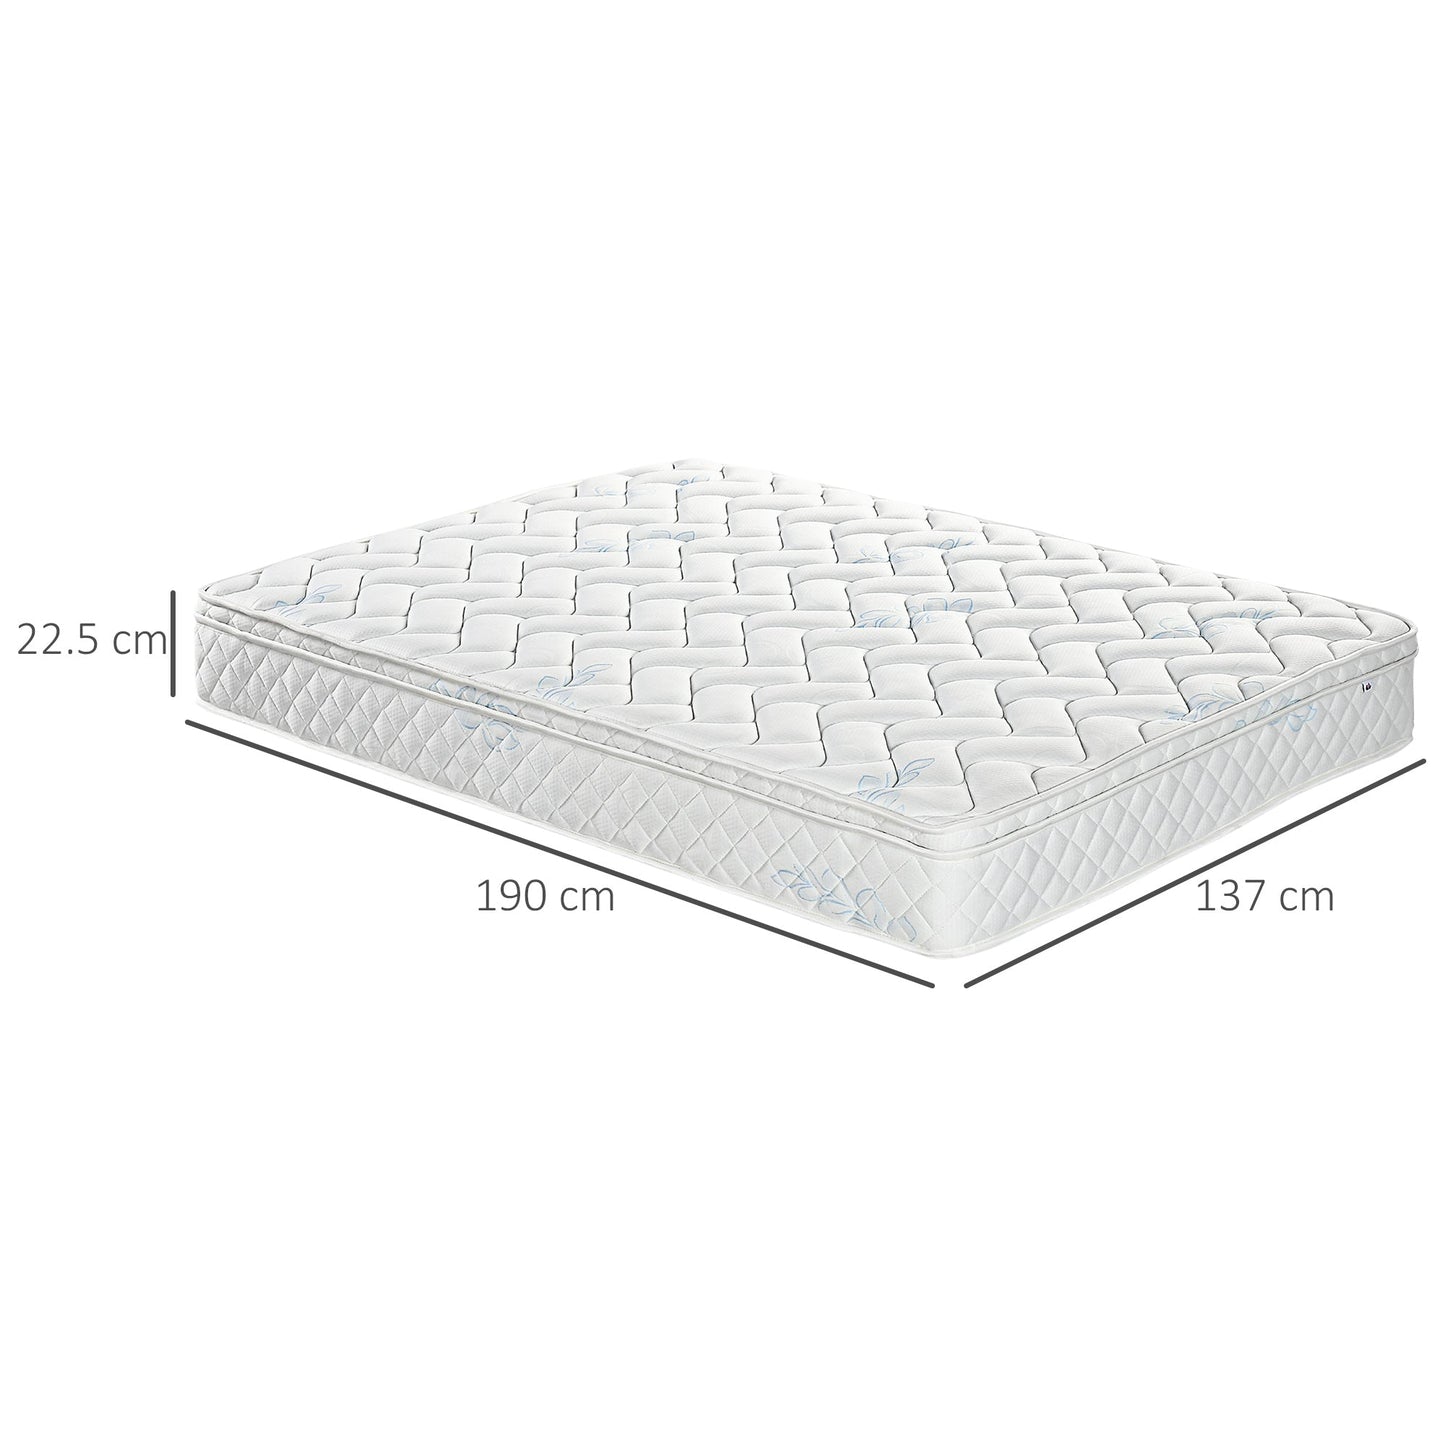 HOMCOM Double Mattress, Pocket Sprung Mattress in a Box with Breathable Foam and Individually Wrapped Spring, 190cmx137cmx22.5cm, White